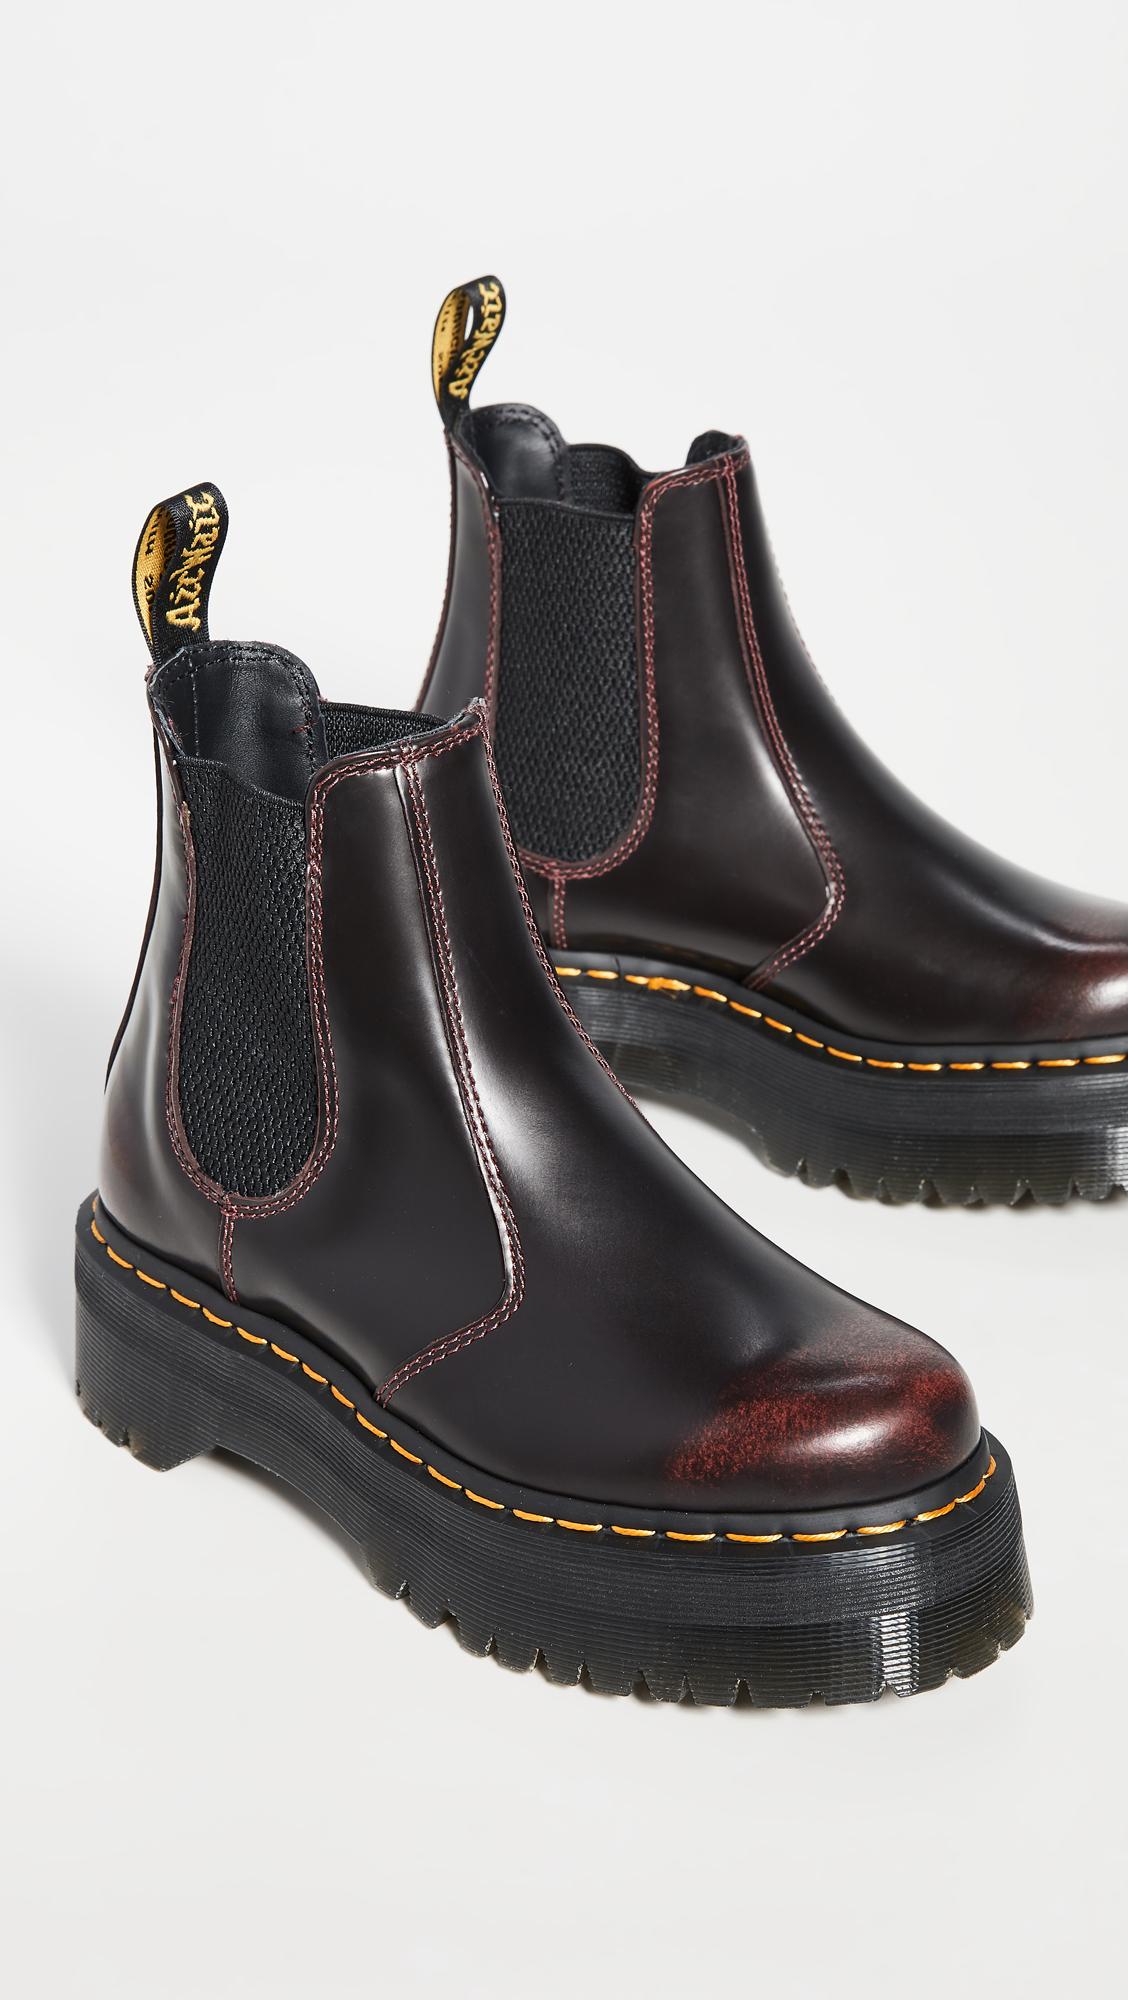 Dr. Martens 2976 Quad Chelsea Boots in Black | Lyst